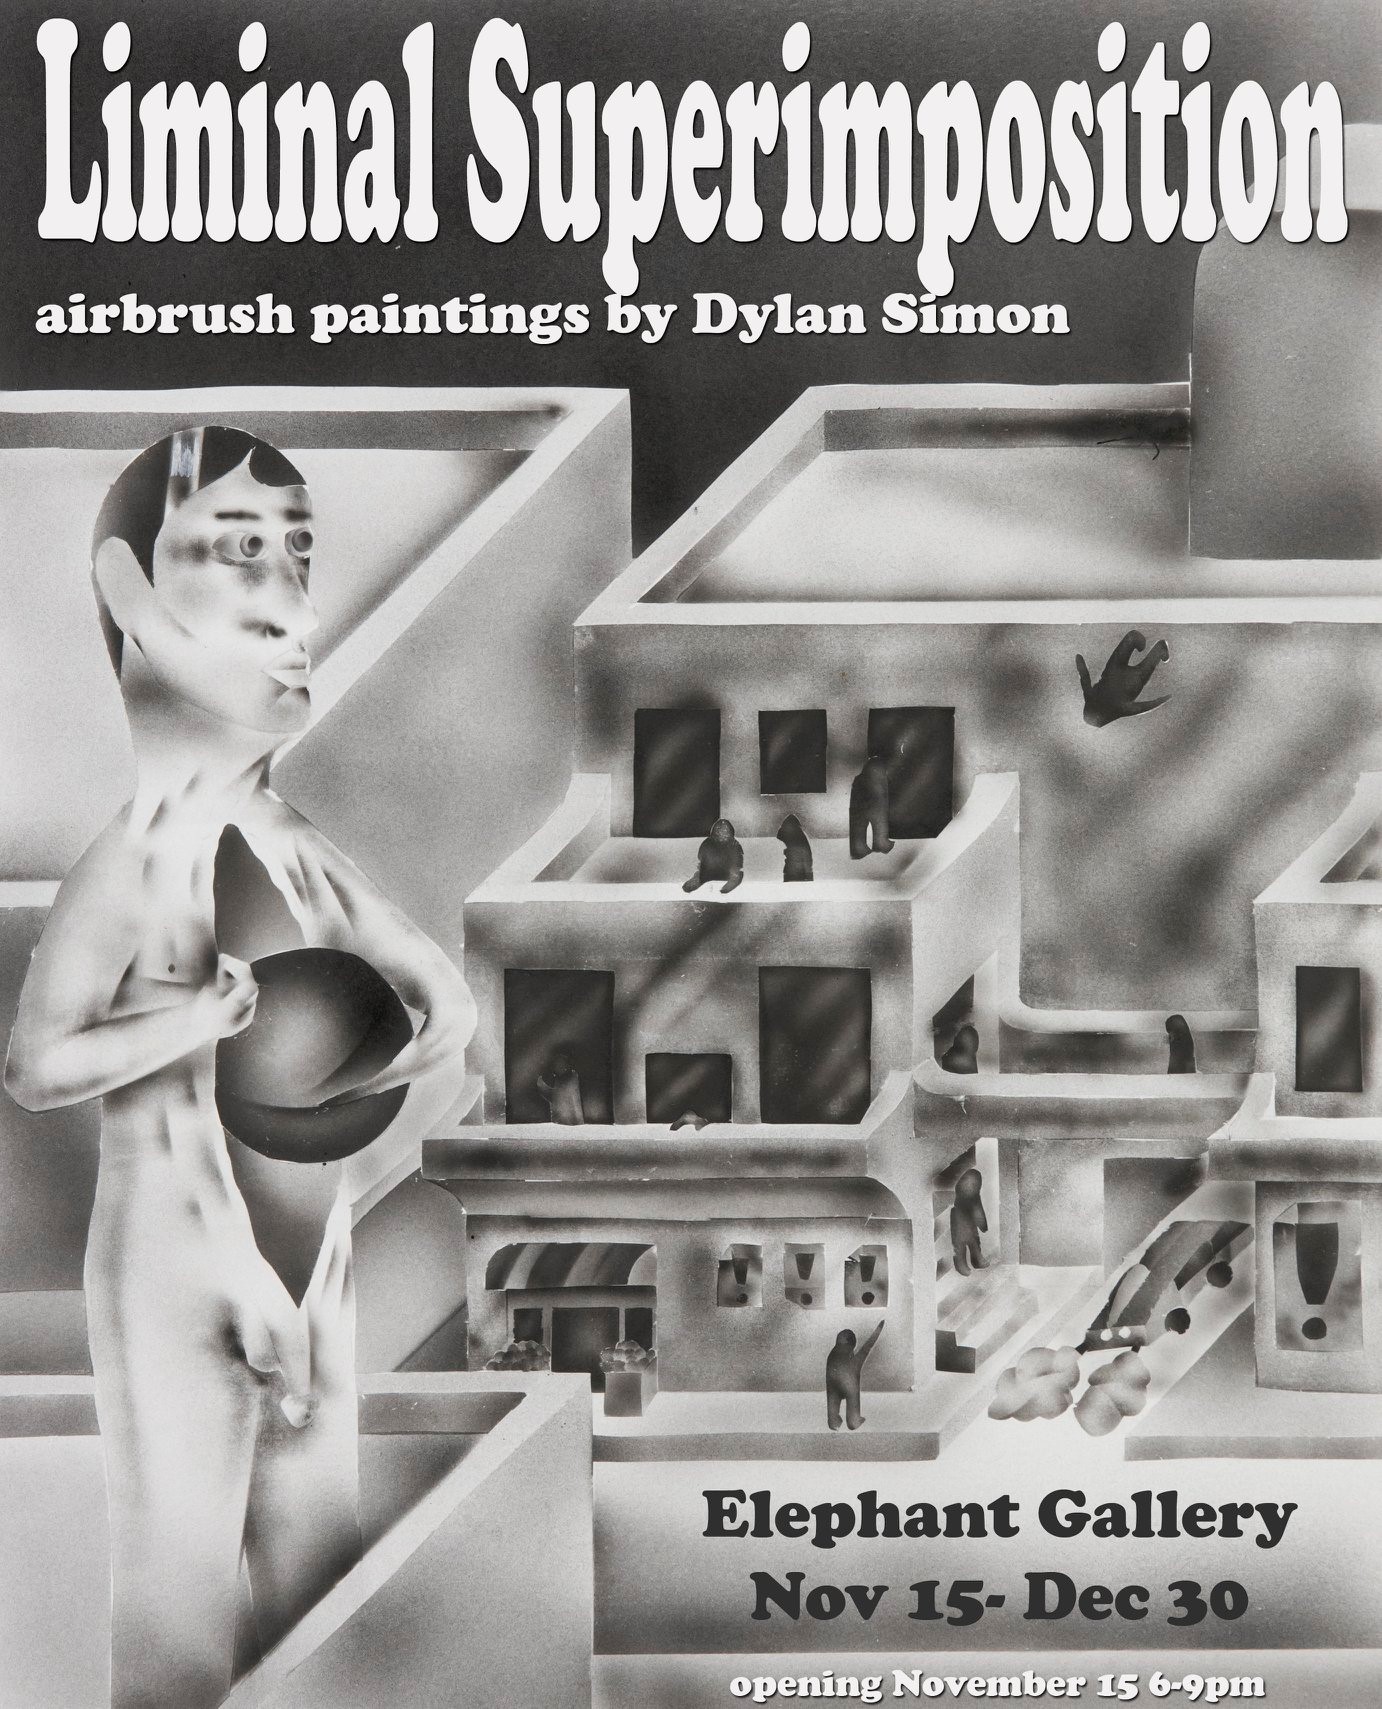 Also opening this Friday is Liminal Superimposition: works by Dylan Simon.